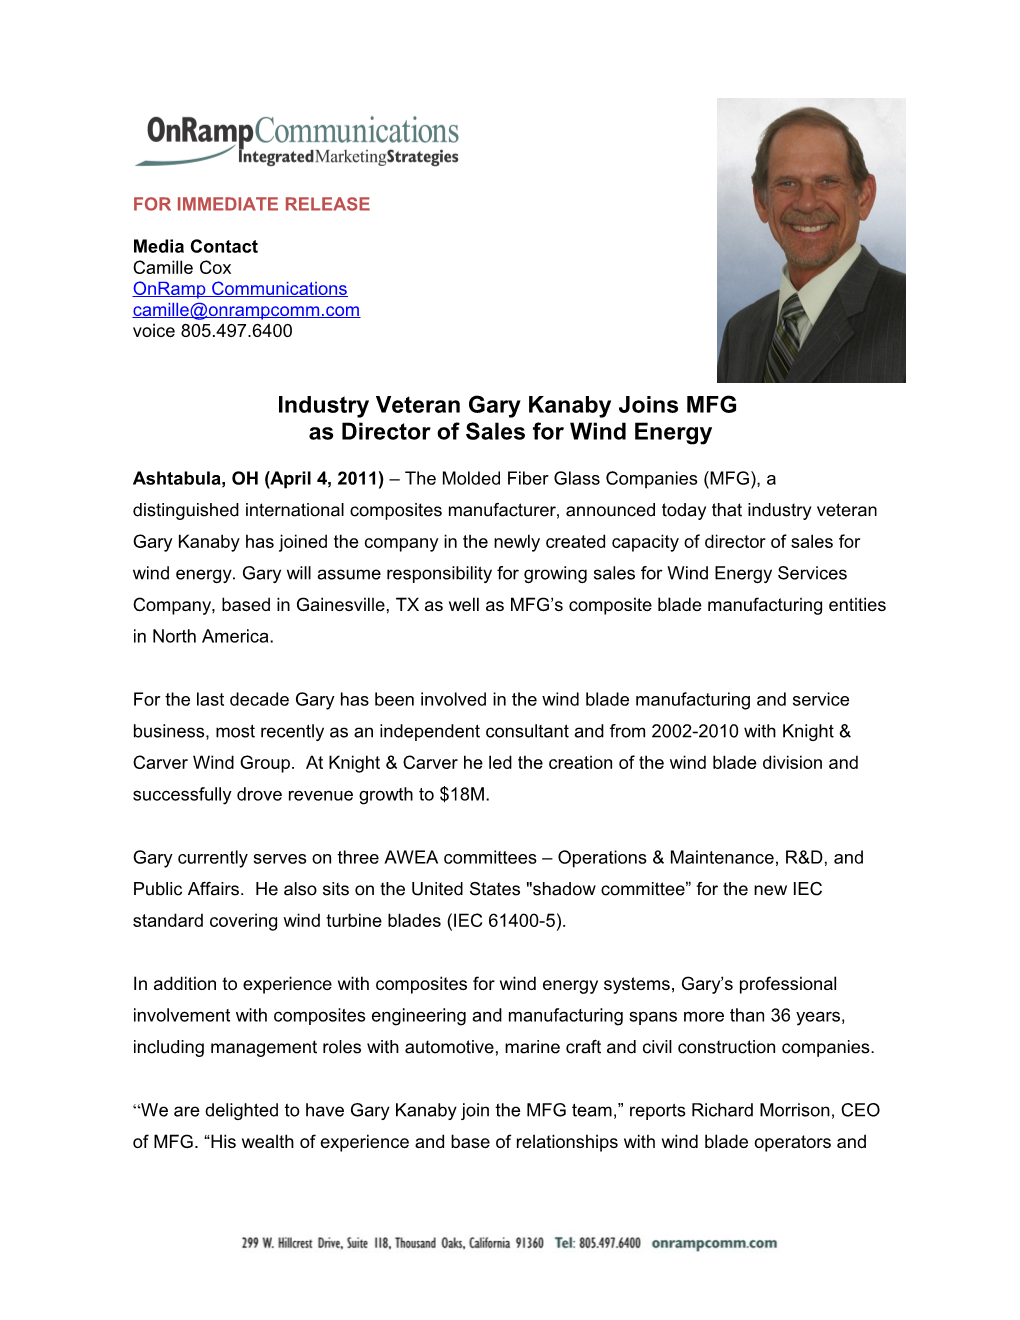 Industry Veteran Gary Kanaby Joins MFG As Director of Sales for Wind Energy